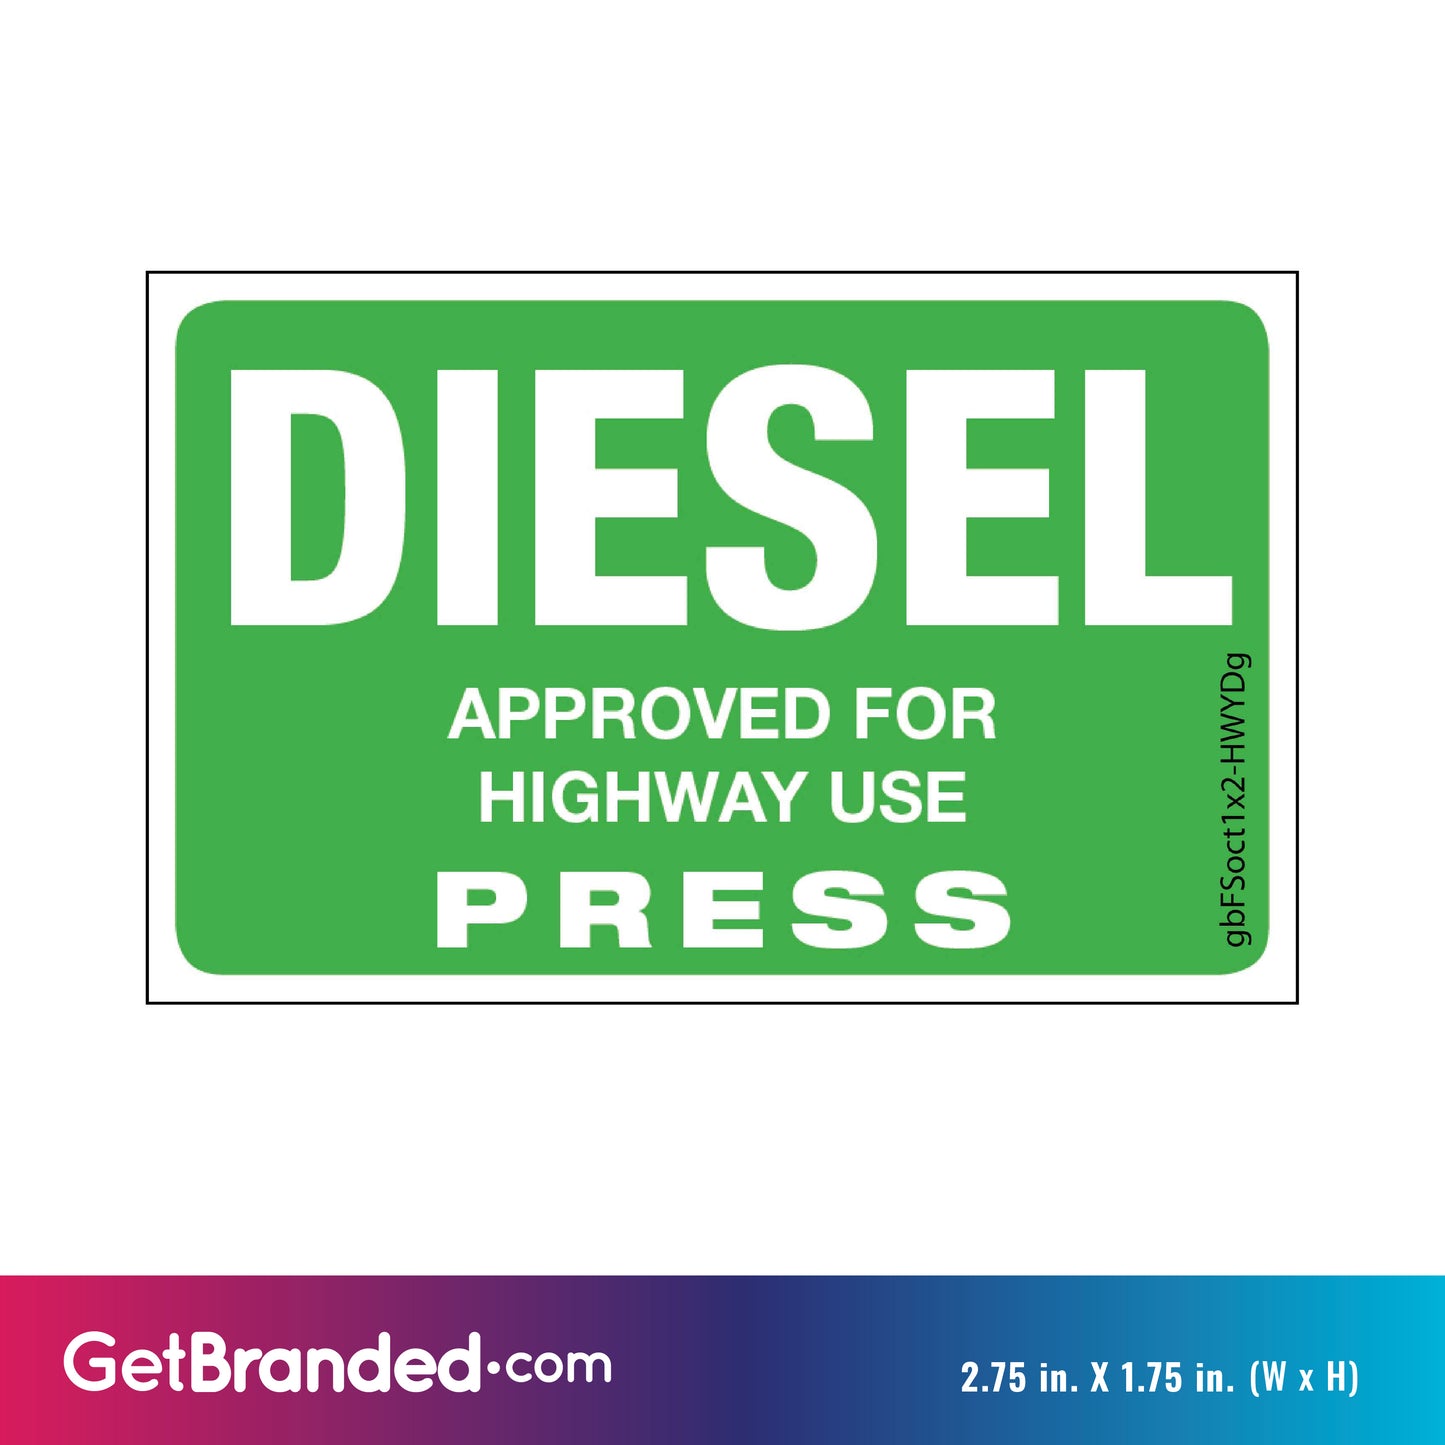 Diesel (On Road) Press Octane Rating Decal - Green size guide.